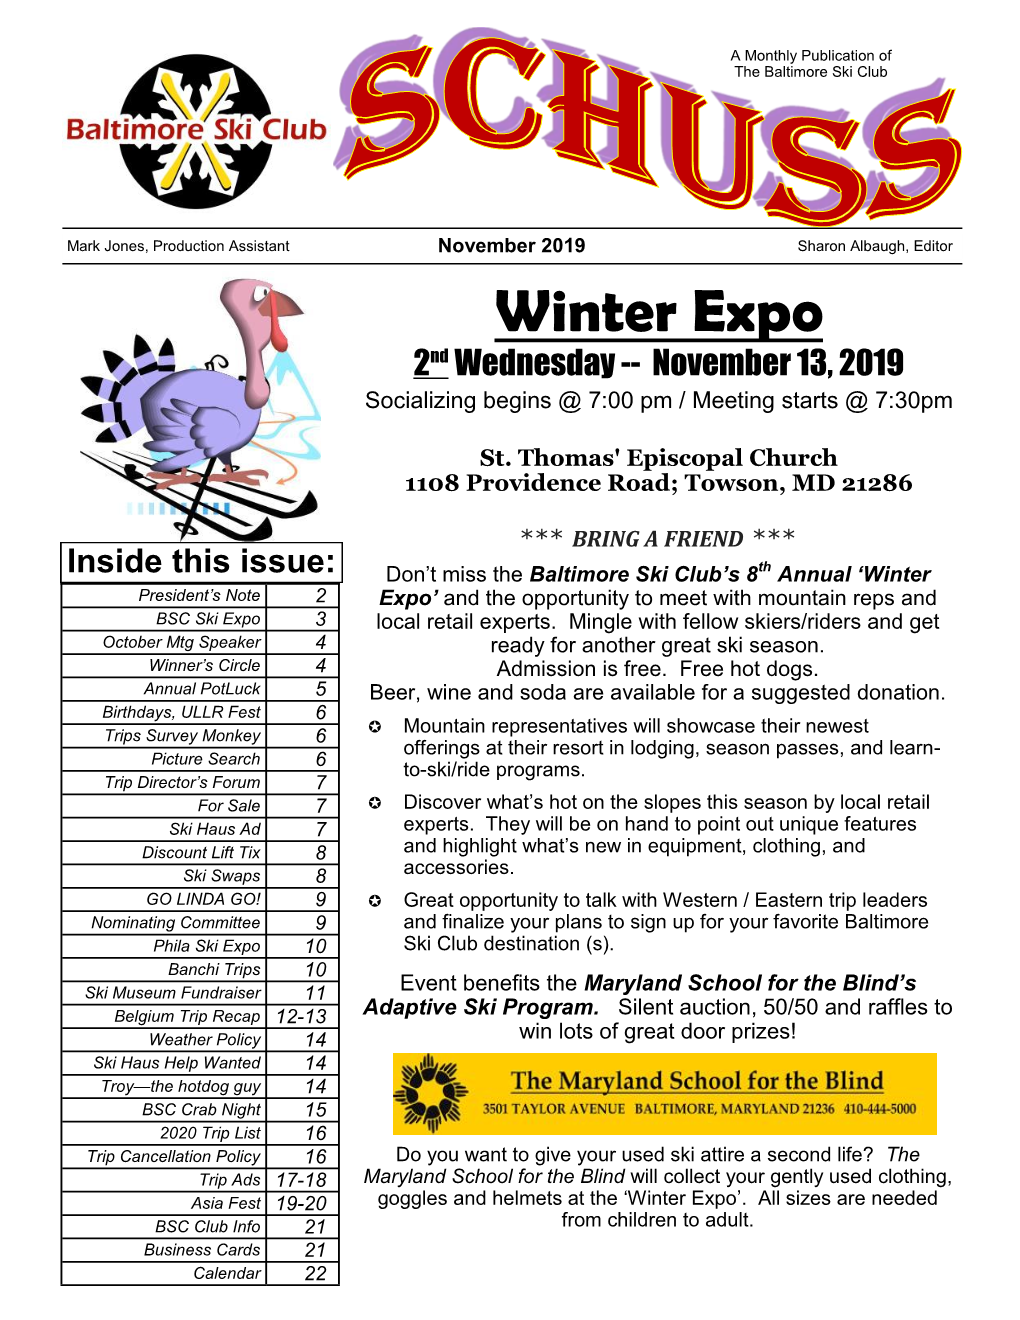 Winter Expo 2Nd Wednesday -- November 13, 2019 Socializing Begins @ 7:00 Pm / Meeting Starts @ 7:30Pm